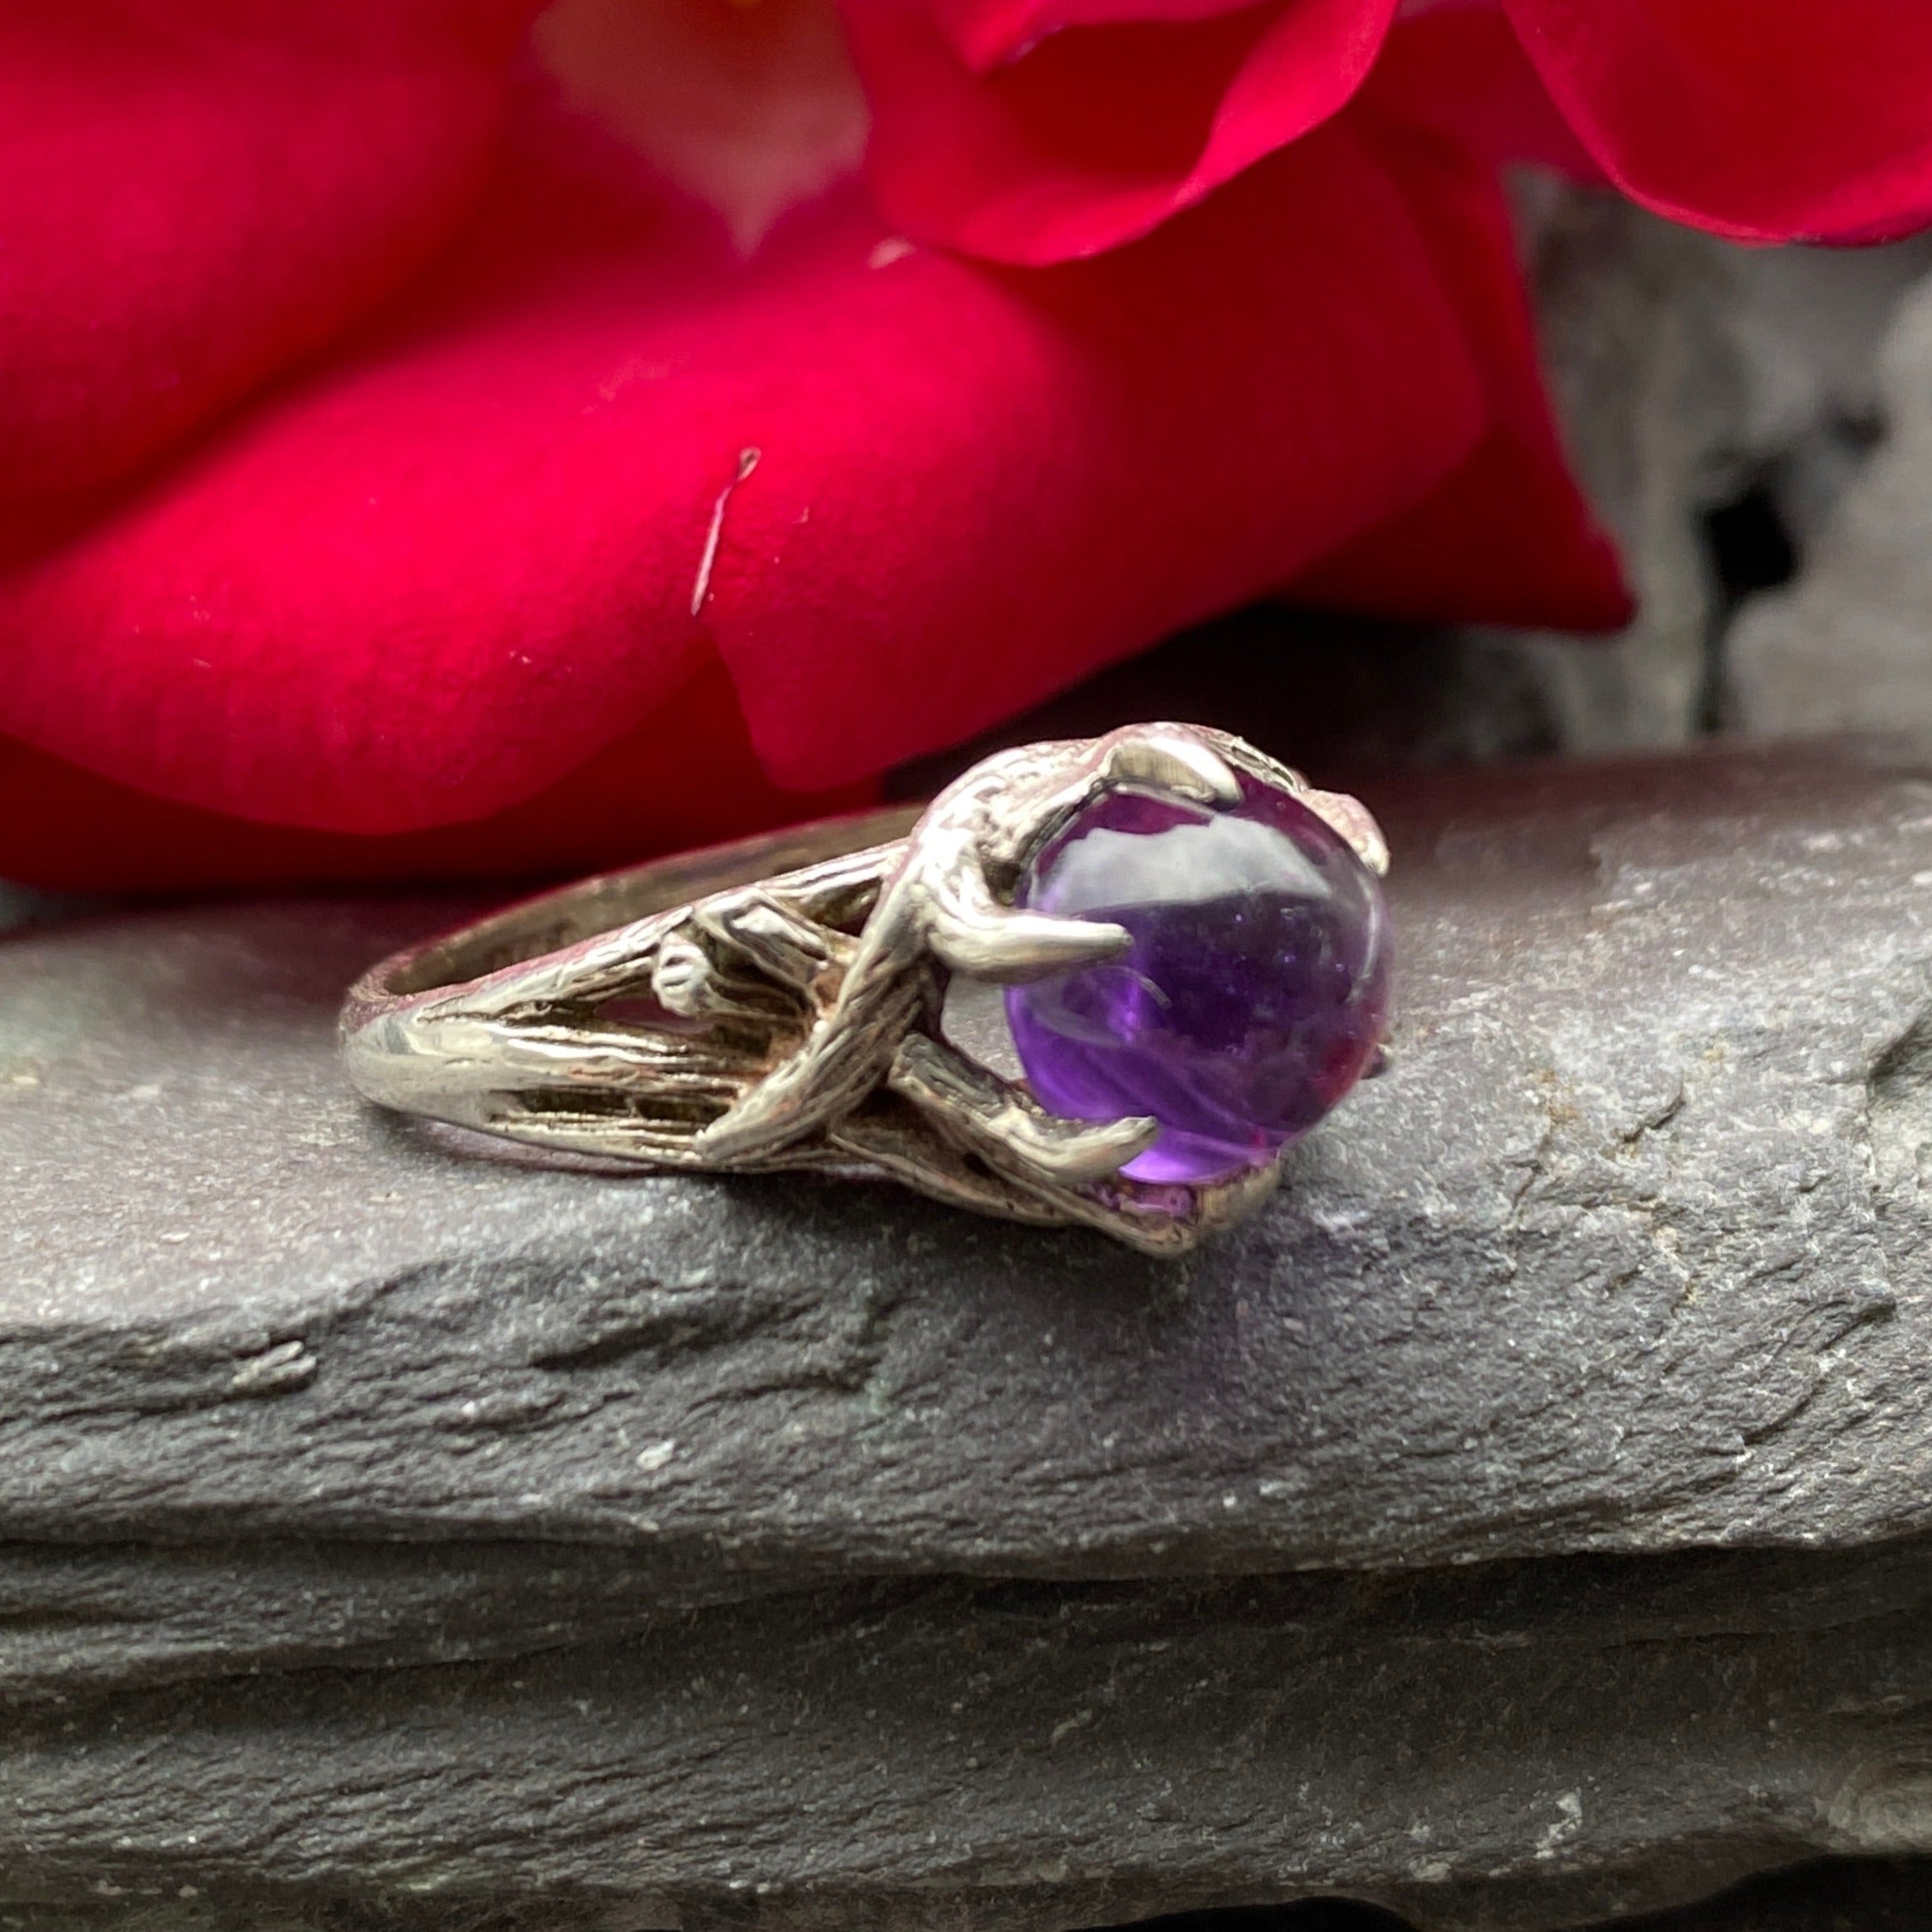 Vintage Amethyst Naturalistic Ring Size R or 8 3/4 US.